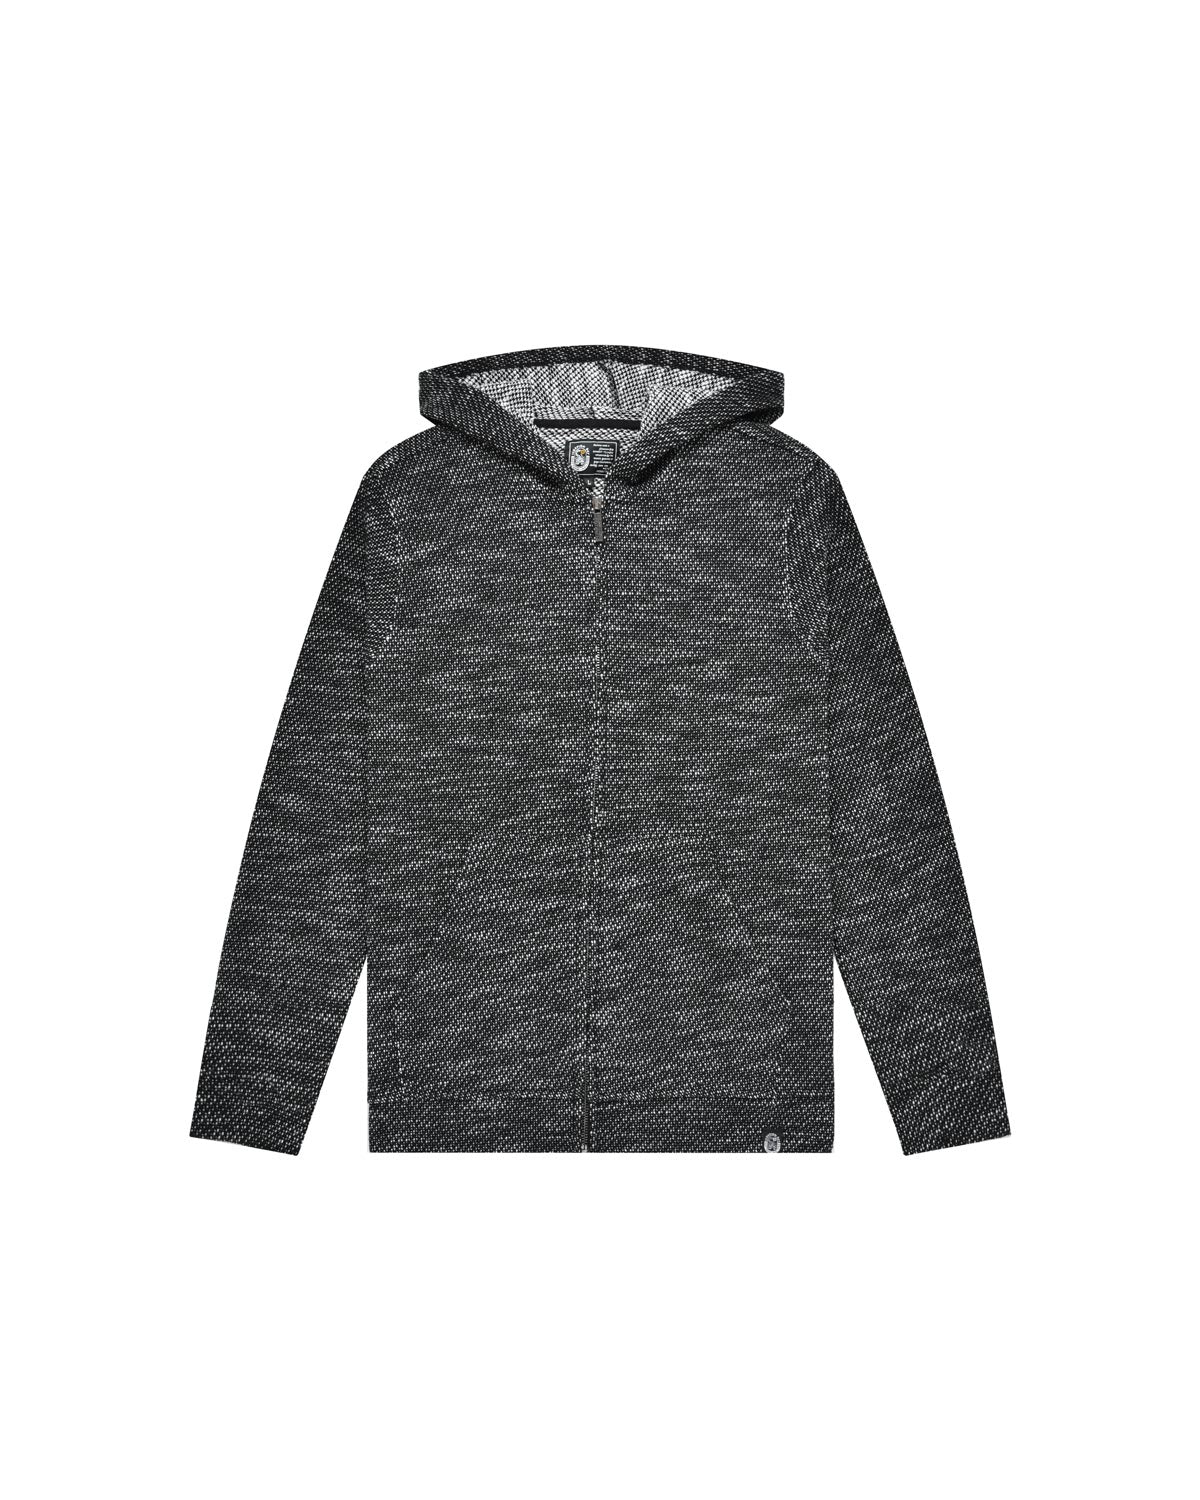 Man | Black knitted pullover with hood and zip